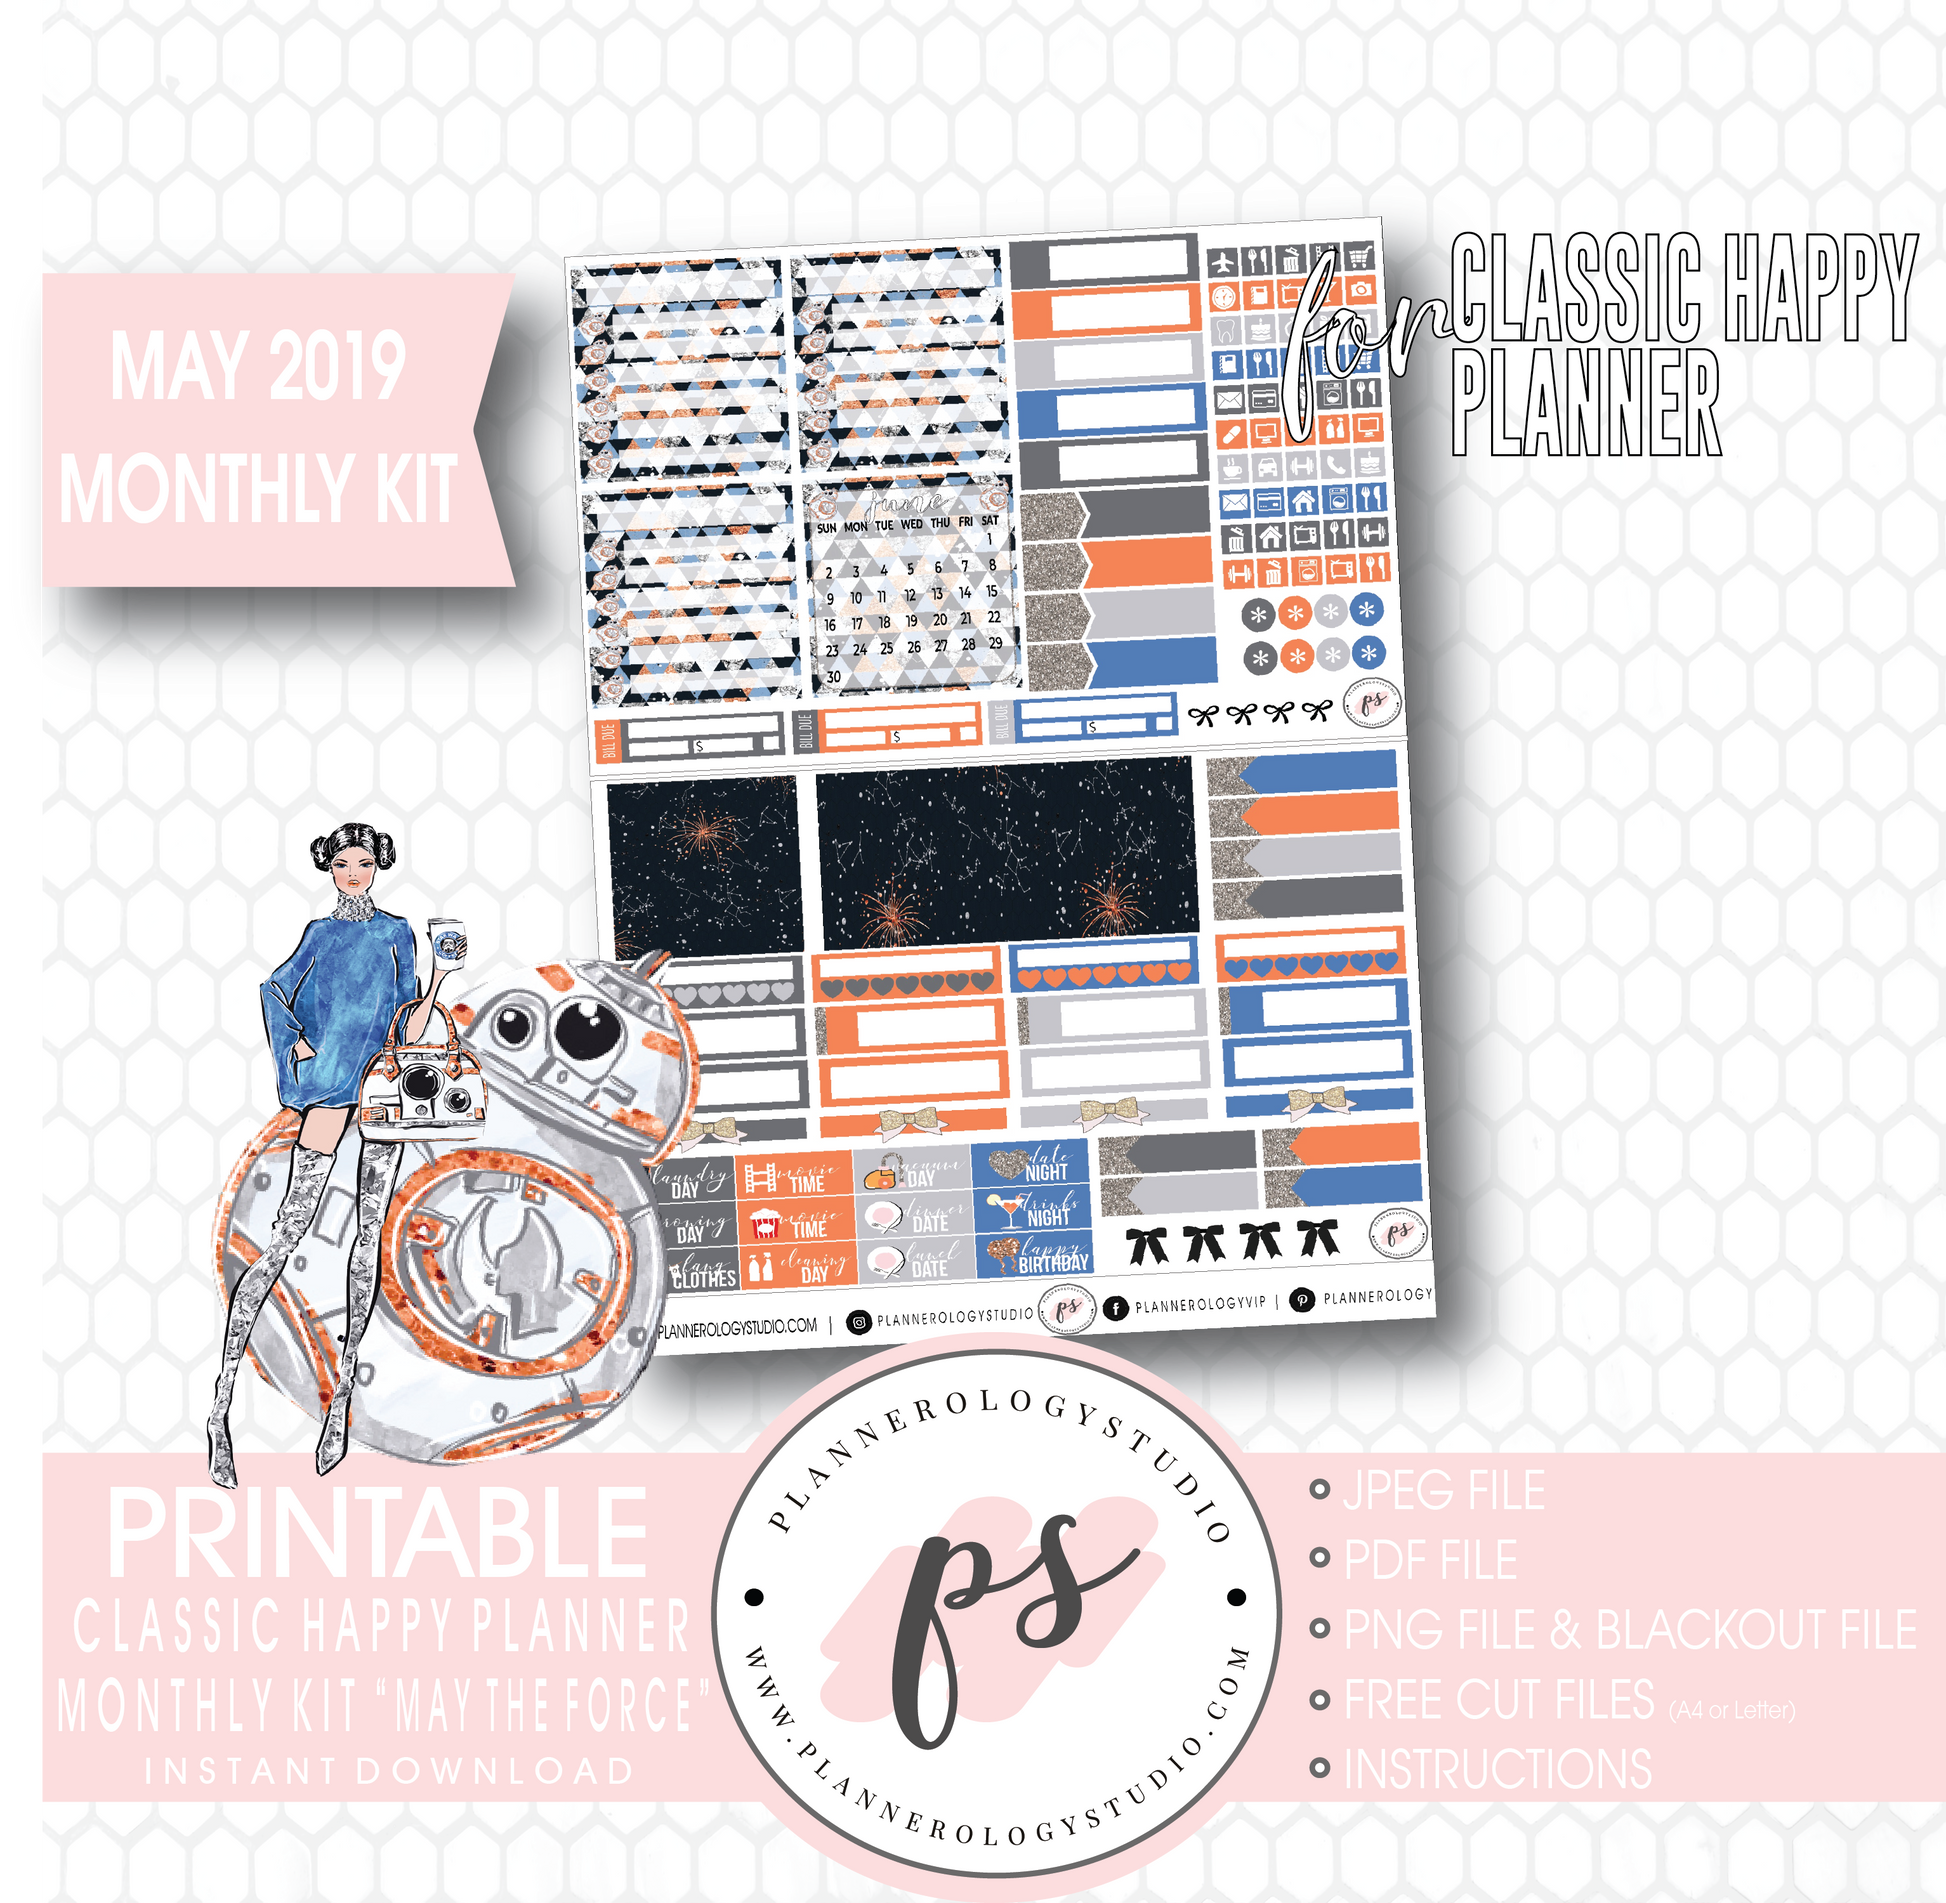 May the Force (Star Wars) May 2019 Monthly View Kit Digital Printable Planner Stickers (for use with Classic Happy Planner) - Plannerologystudio